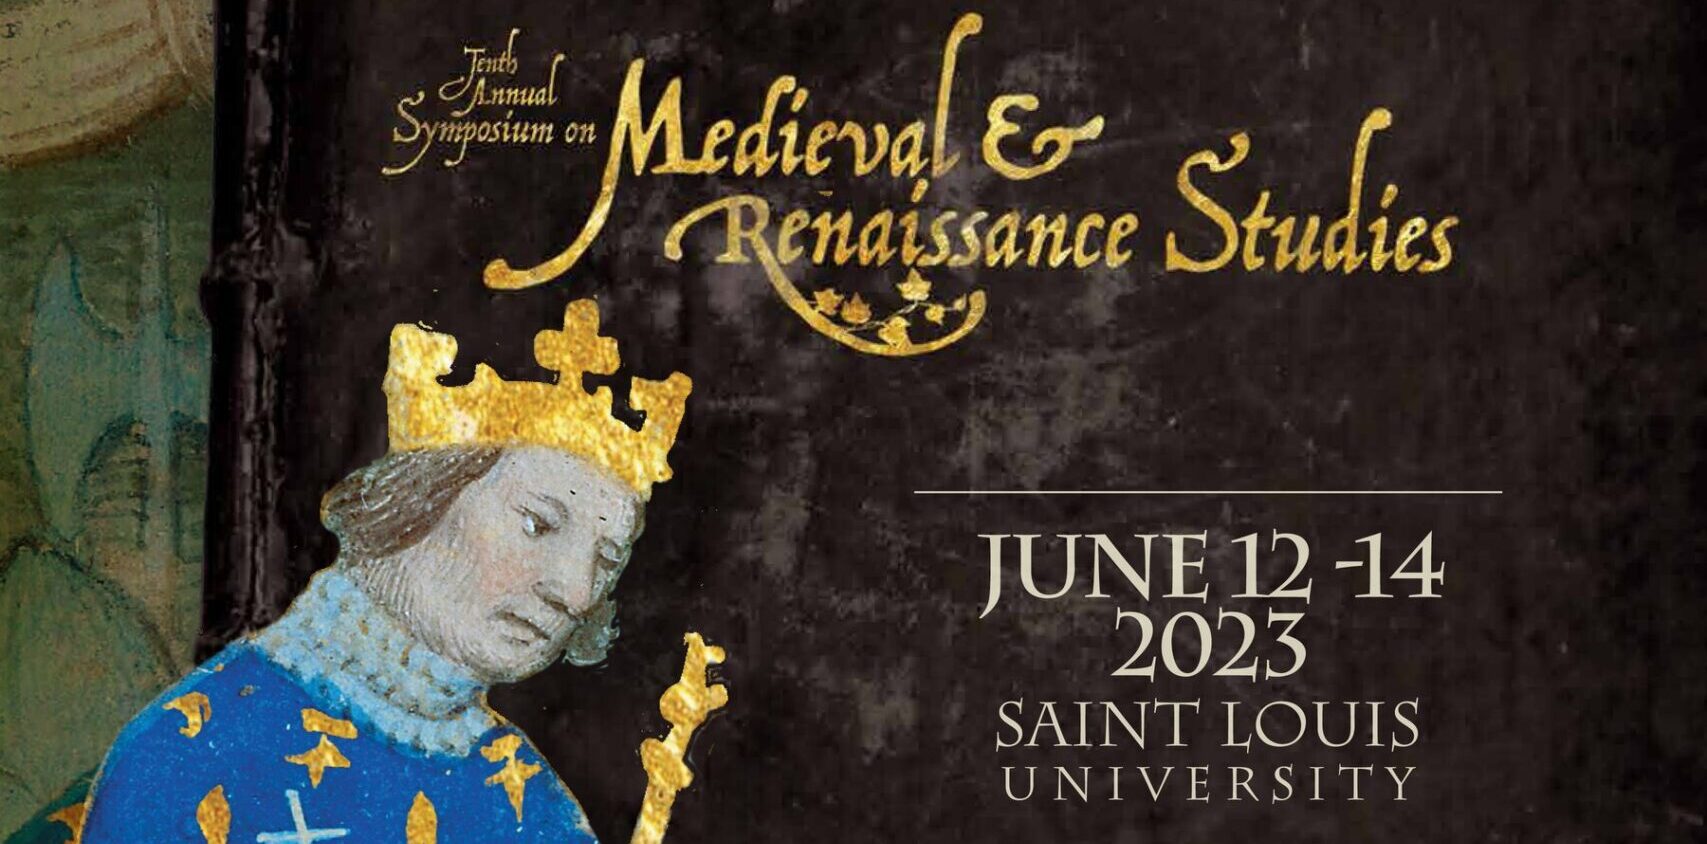 Call for Papers: Tenth Annual Symposium on Medieval and Renaissance Studies